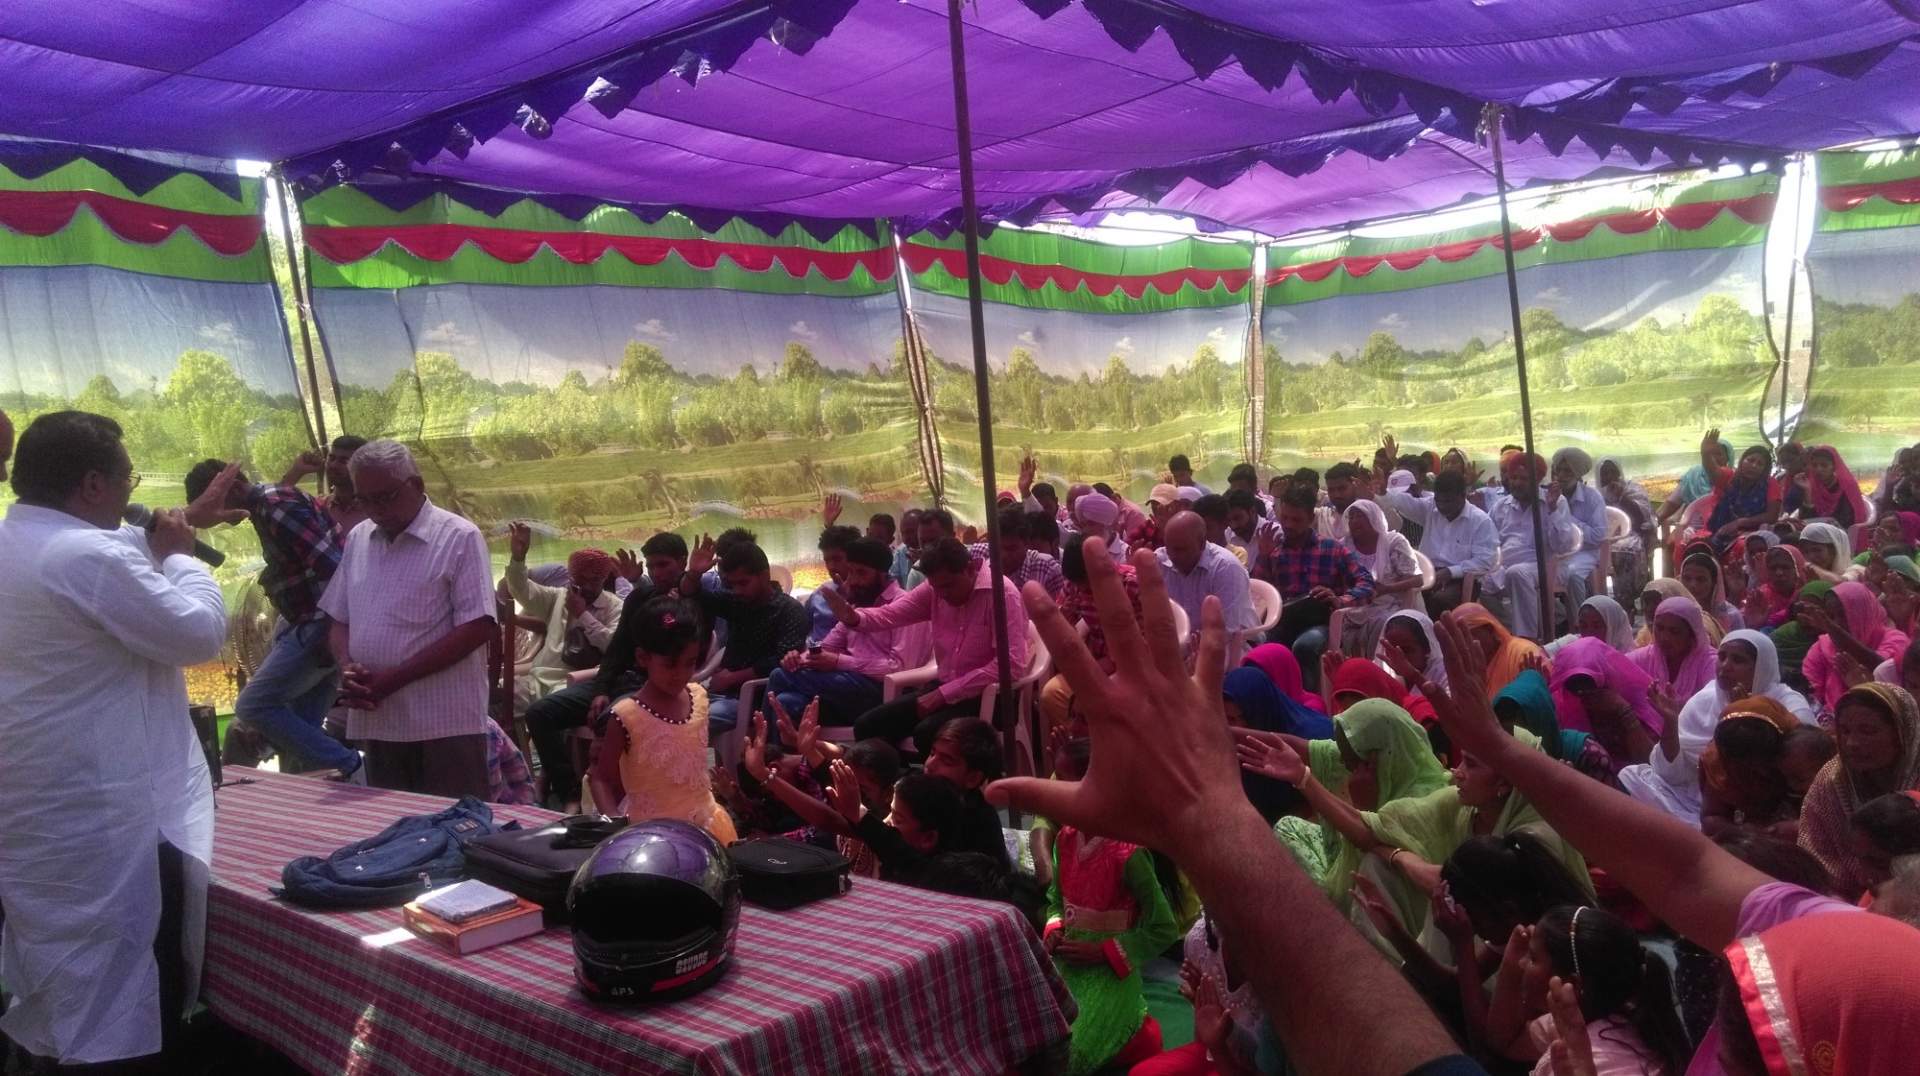 Pastor Singh's growing congregation meets in a tent while waiting for completion of the larger church.